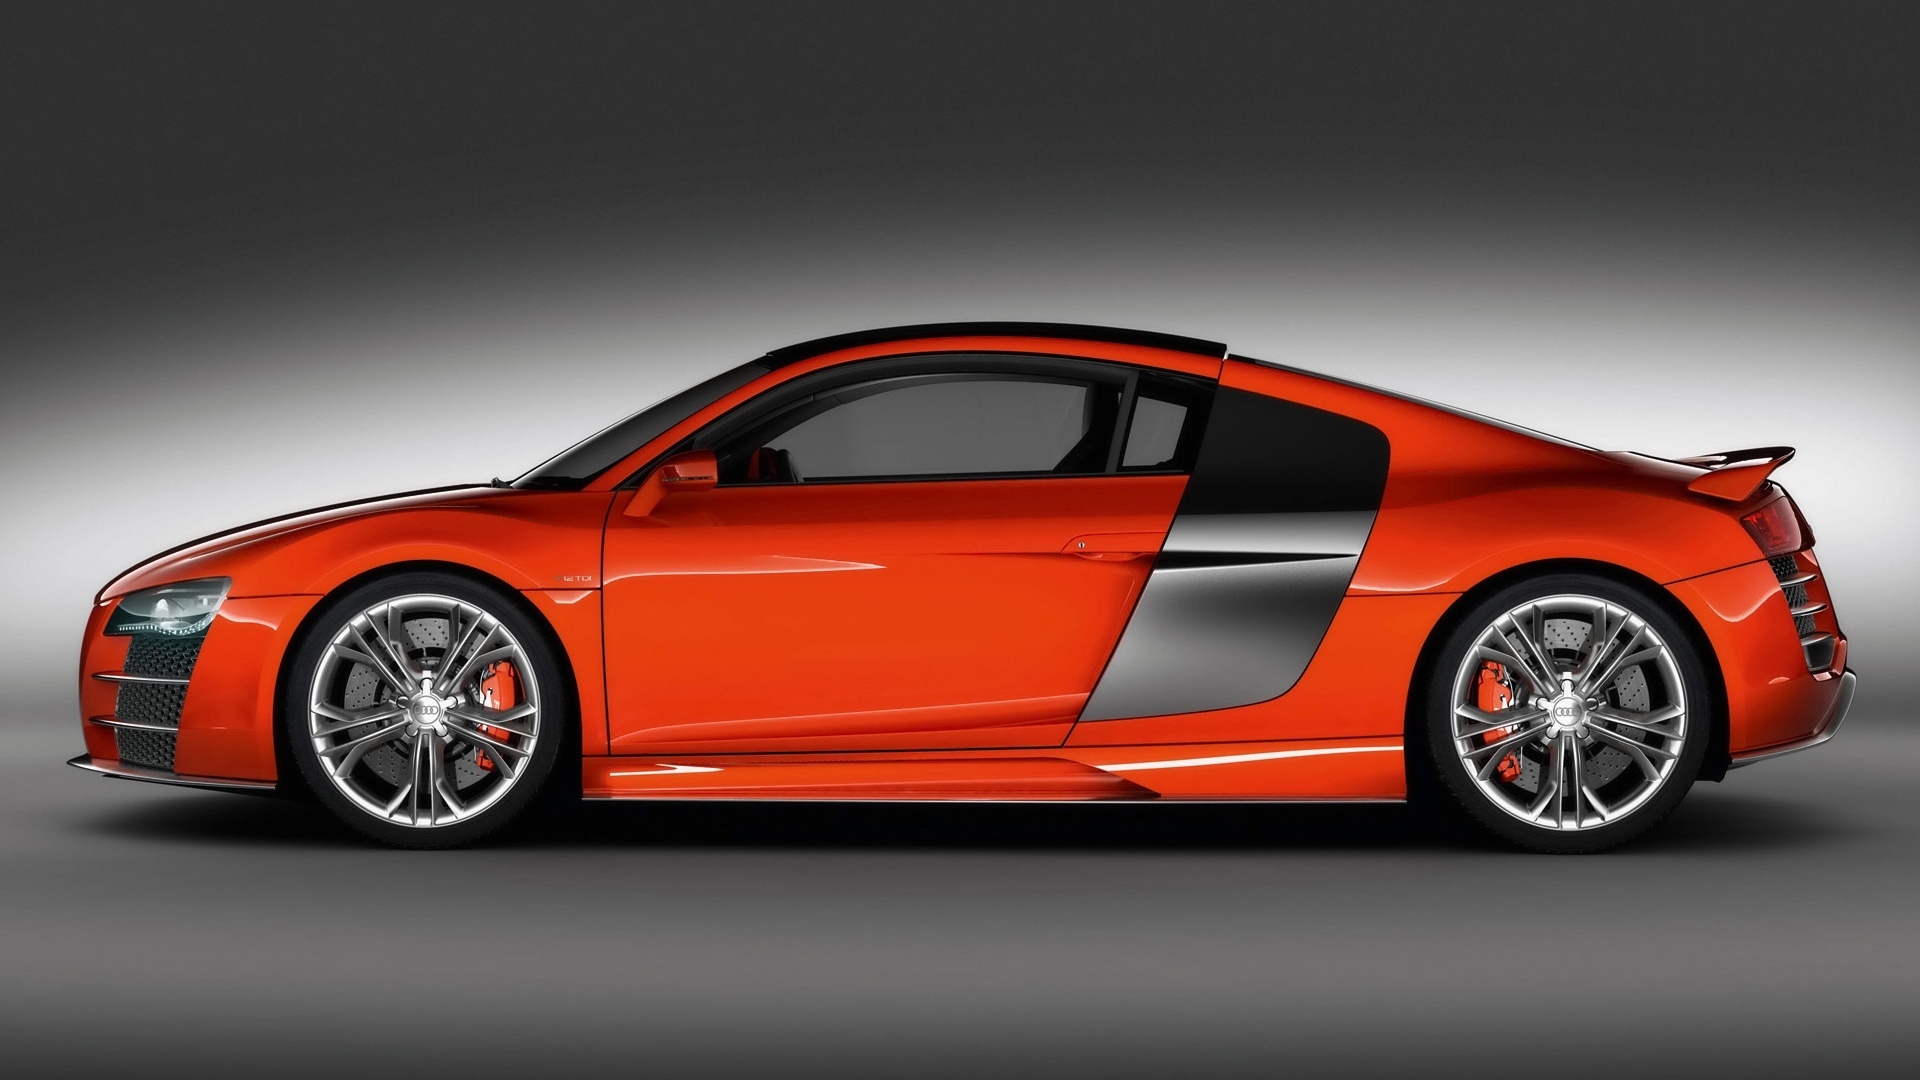 Audi R8 Side Outstanding Torque for 1920 x 1080 HDTV 1080p resolution